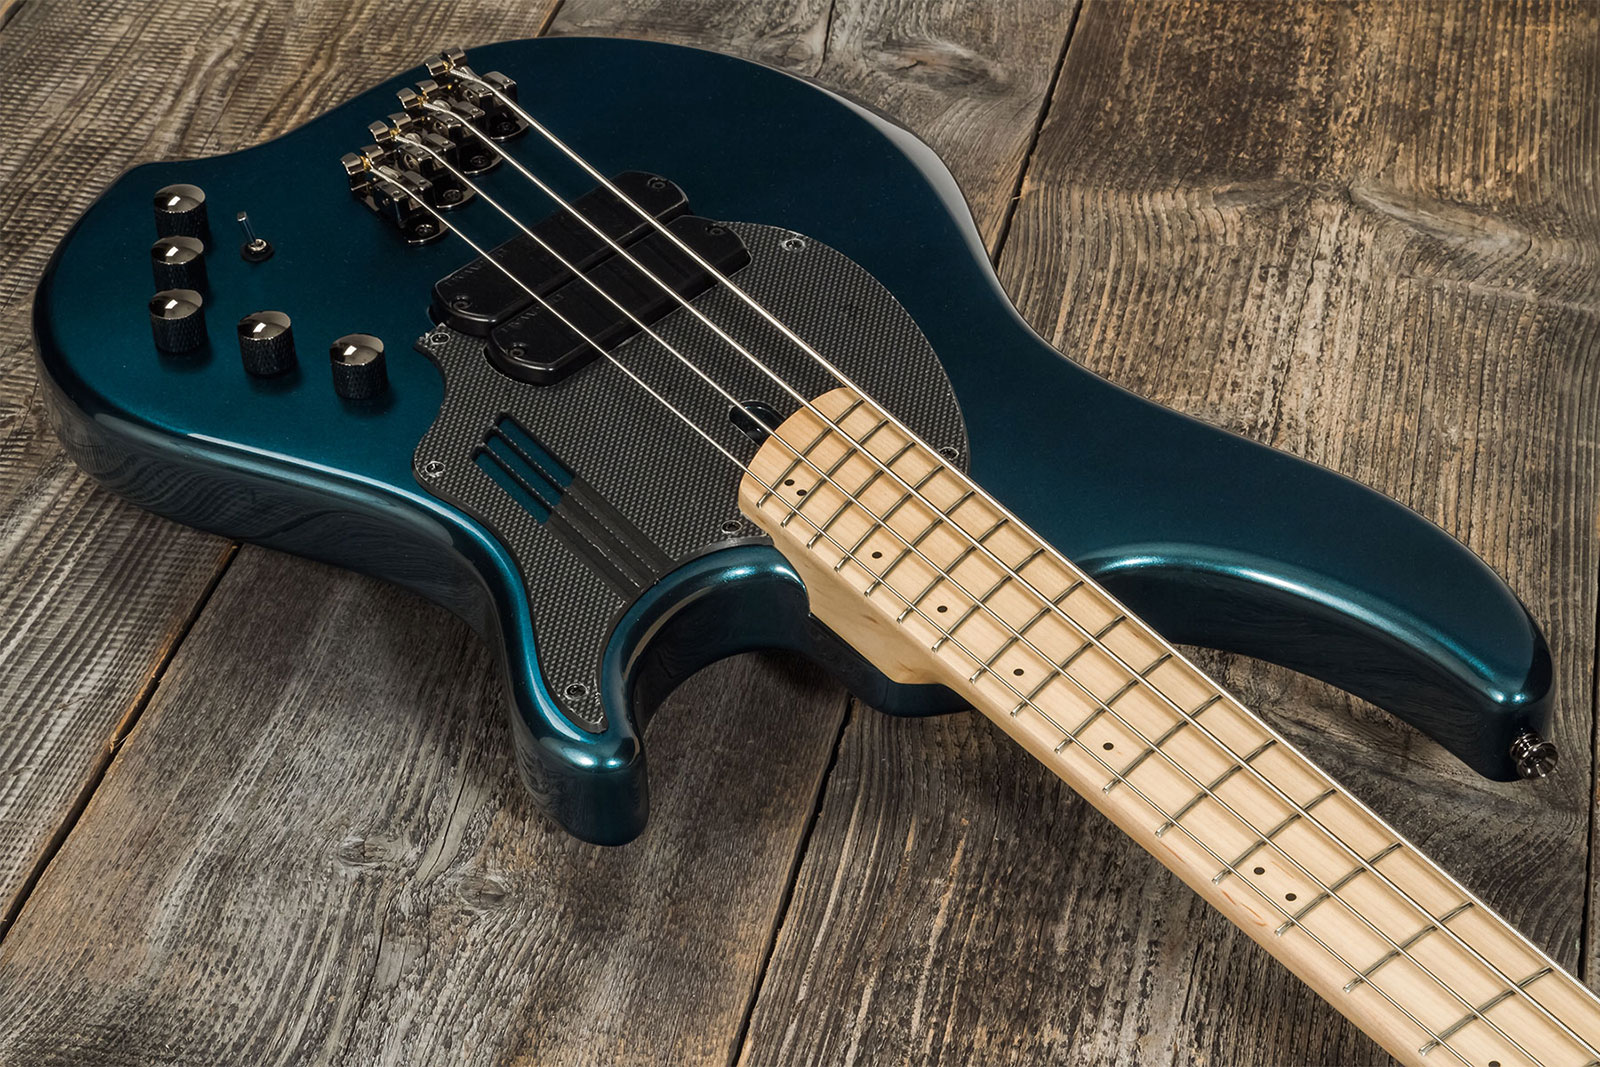 Dingwall Adam Nolly Getgood Ng2 4c Signature 2pu Active Mn - Black Forest Green - Solid body electric bass - Variation 2